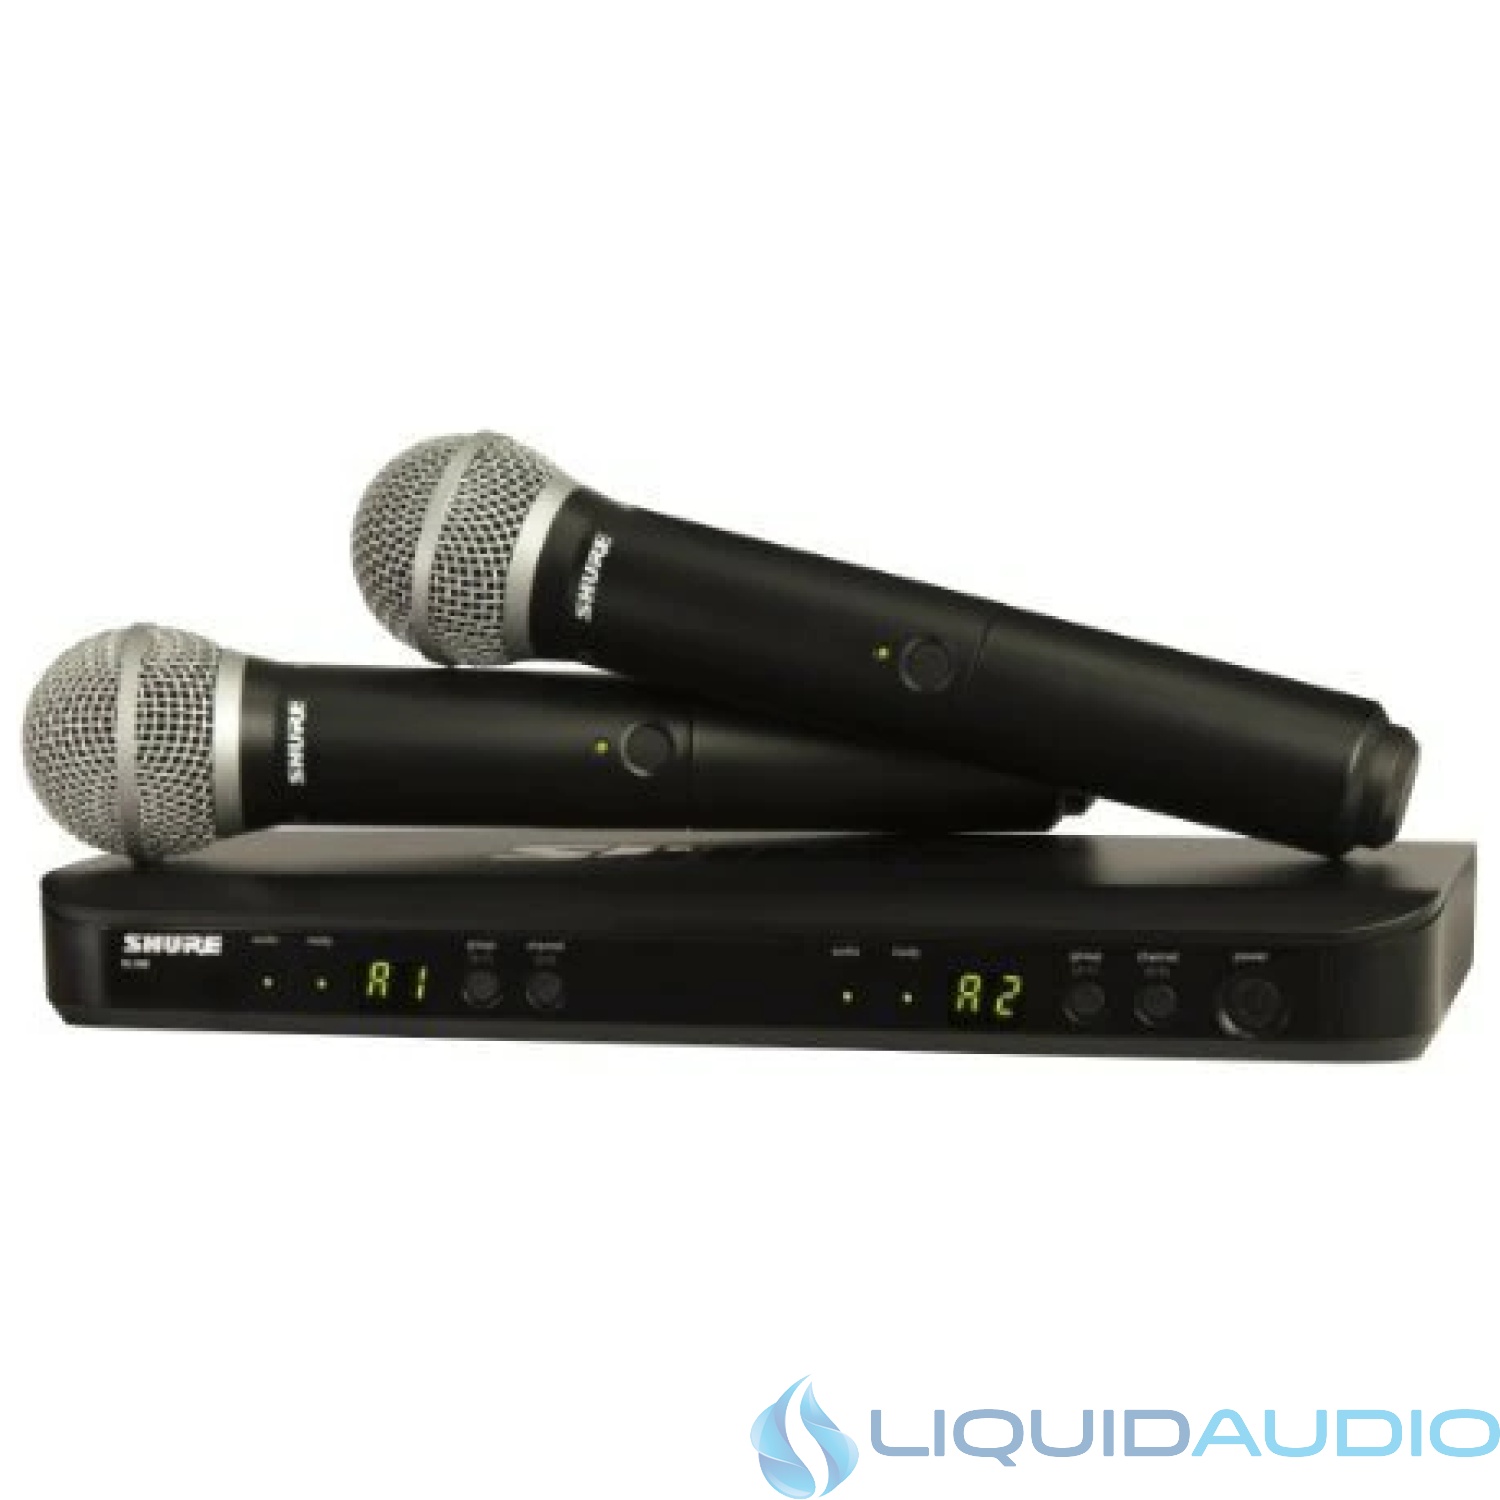 Shure BLX288/PG58 Wireless Vocal Combo with PG58 Handheld Microphones, J10